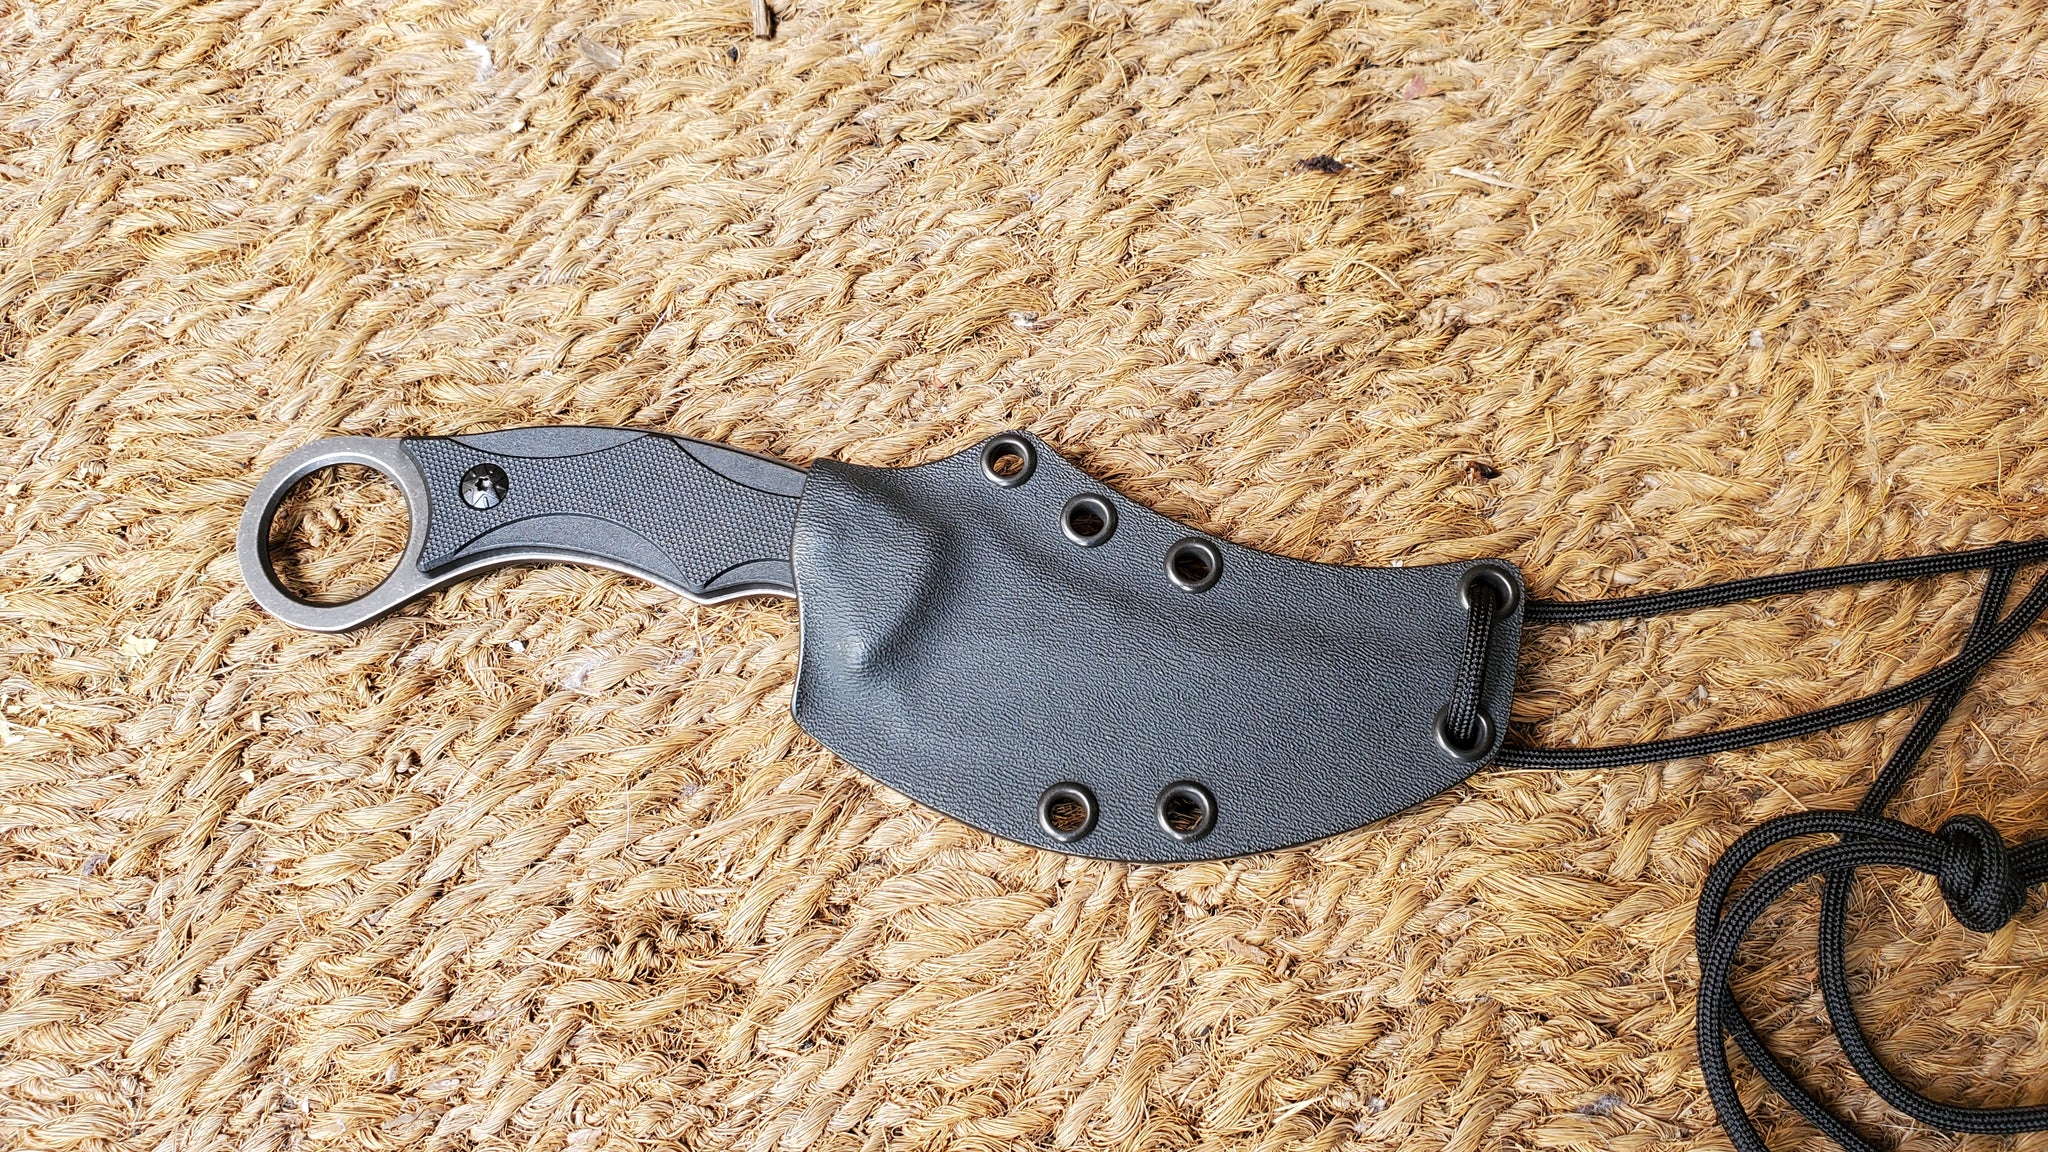 SMITH & WESSON SW995 Pancake Style Custom Kydex Sheath in Neck Carry